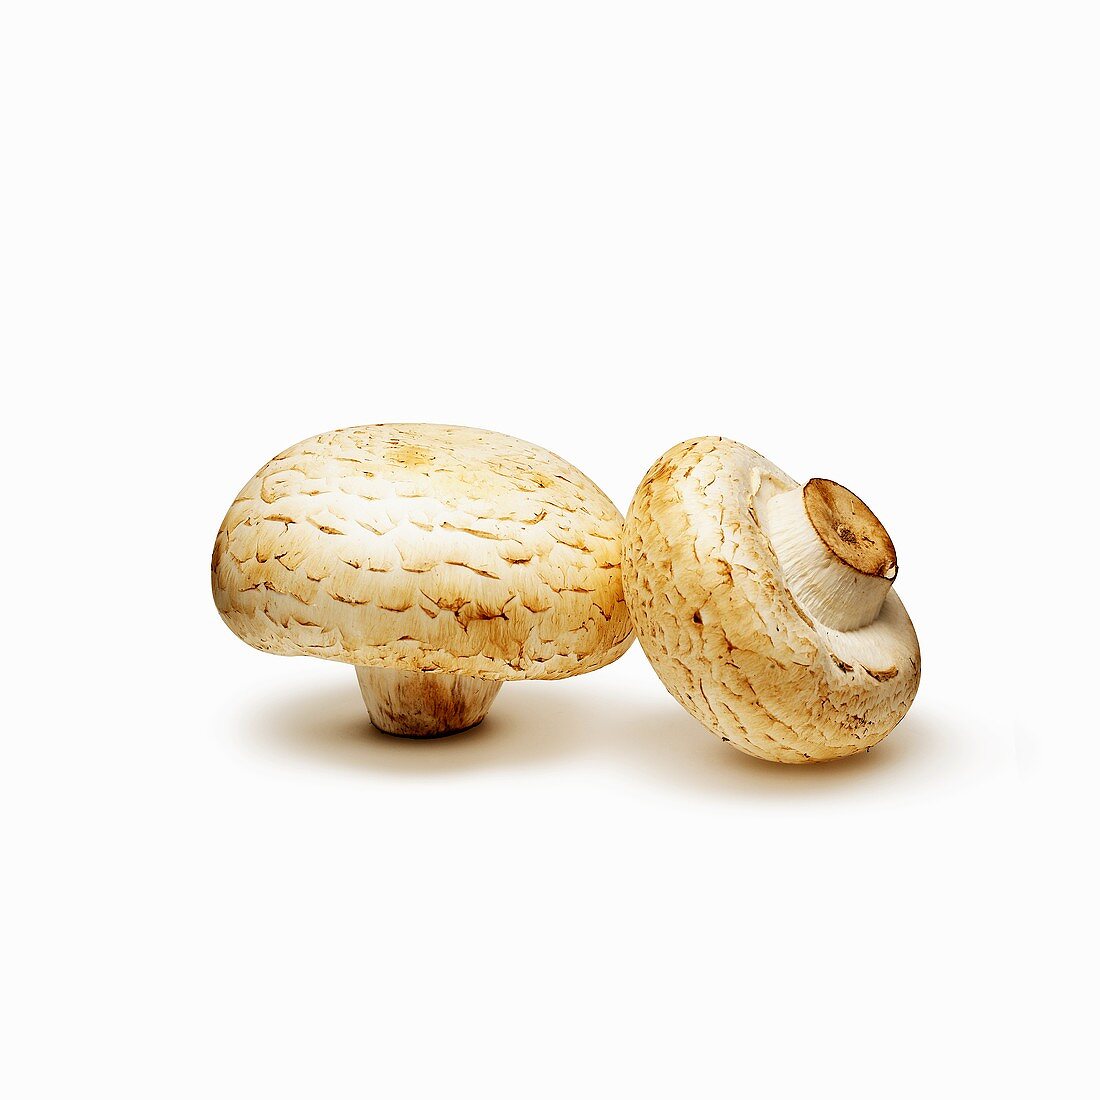 Two Button Mushrooms